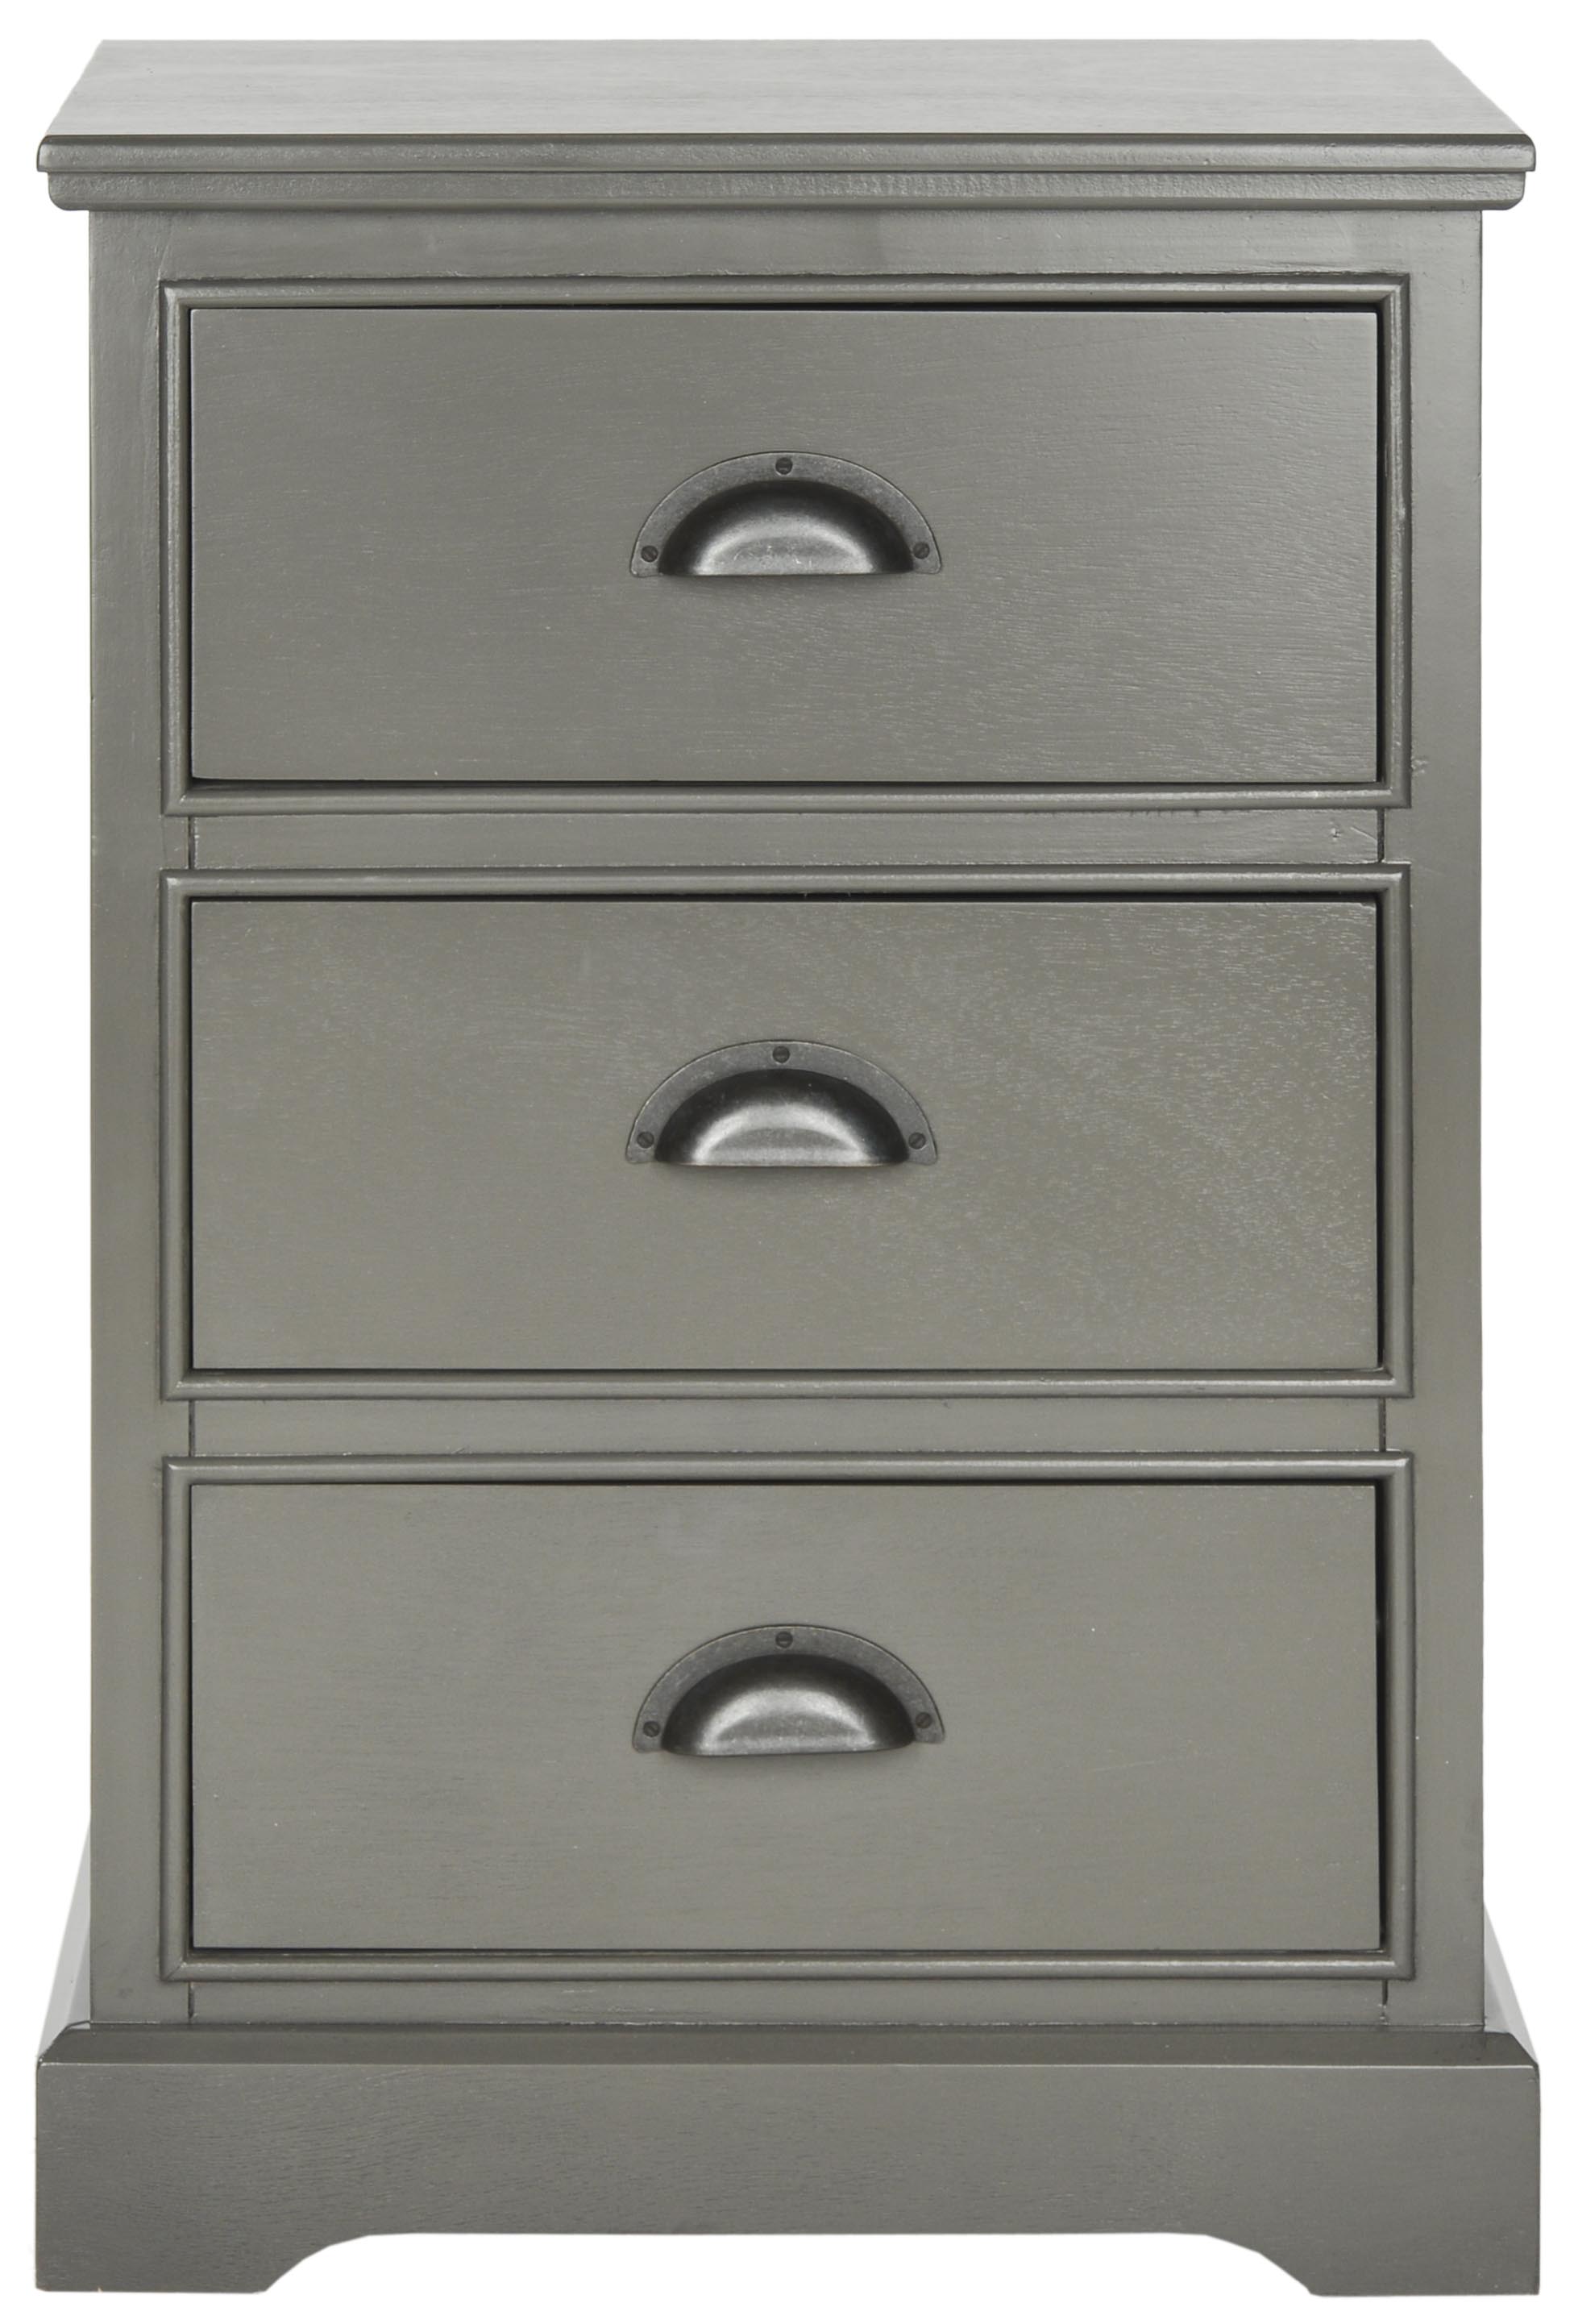 SAFAVIEH Griffin Traditional Rustic 3 Drawer Side Table, Grey - image 3 of 4